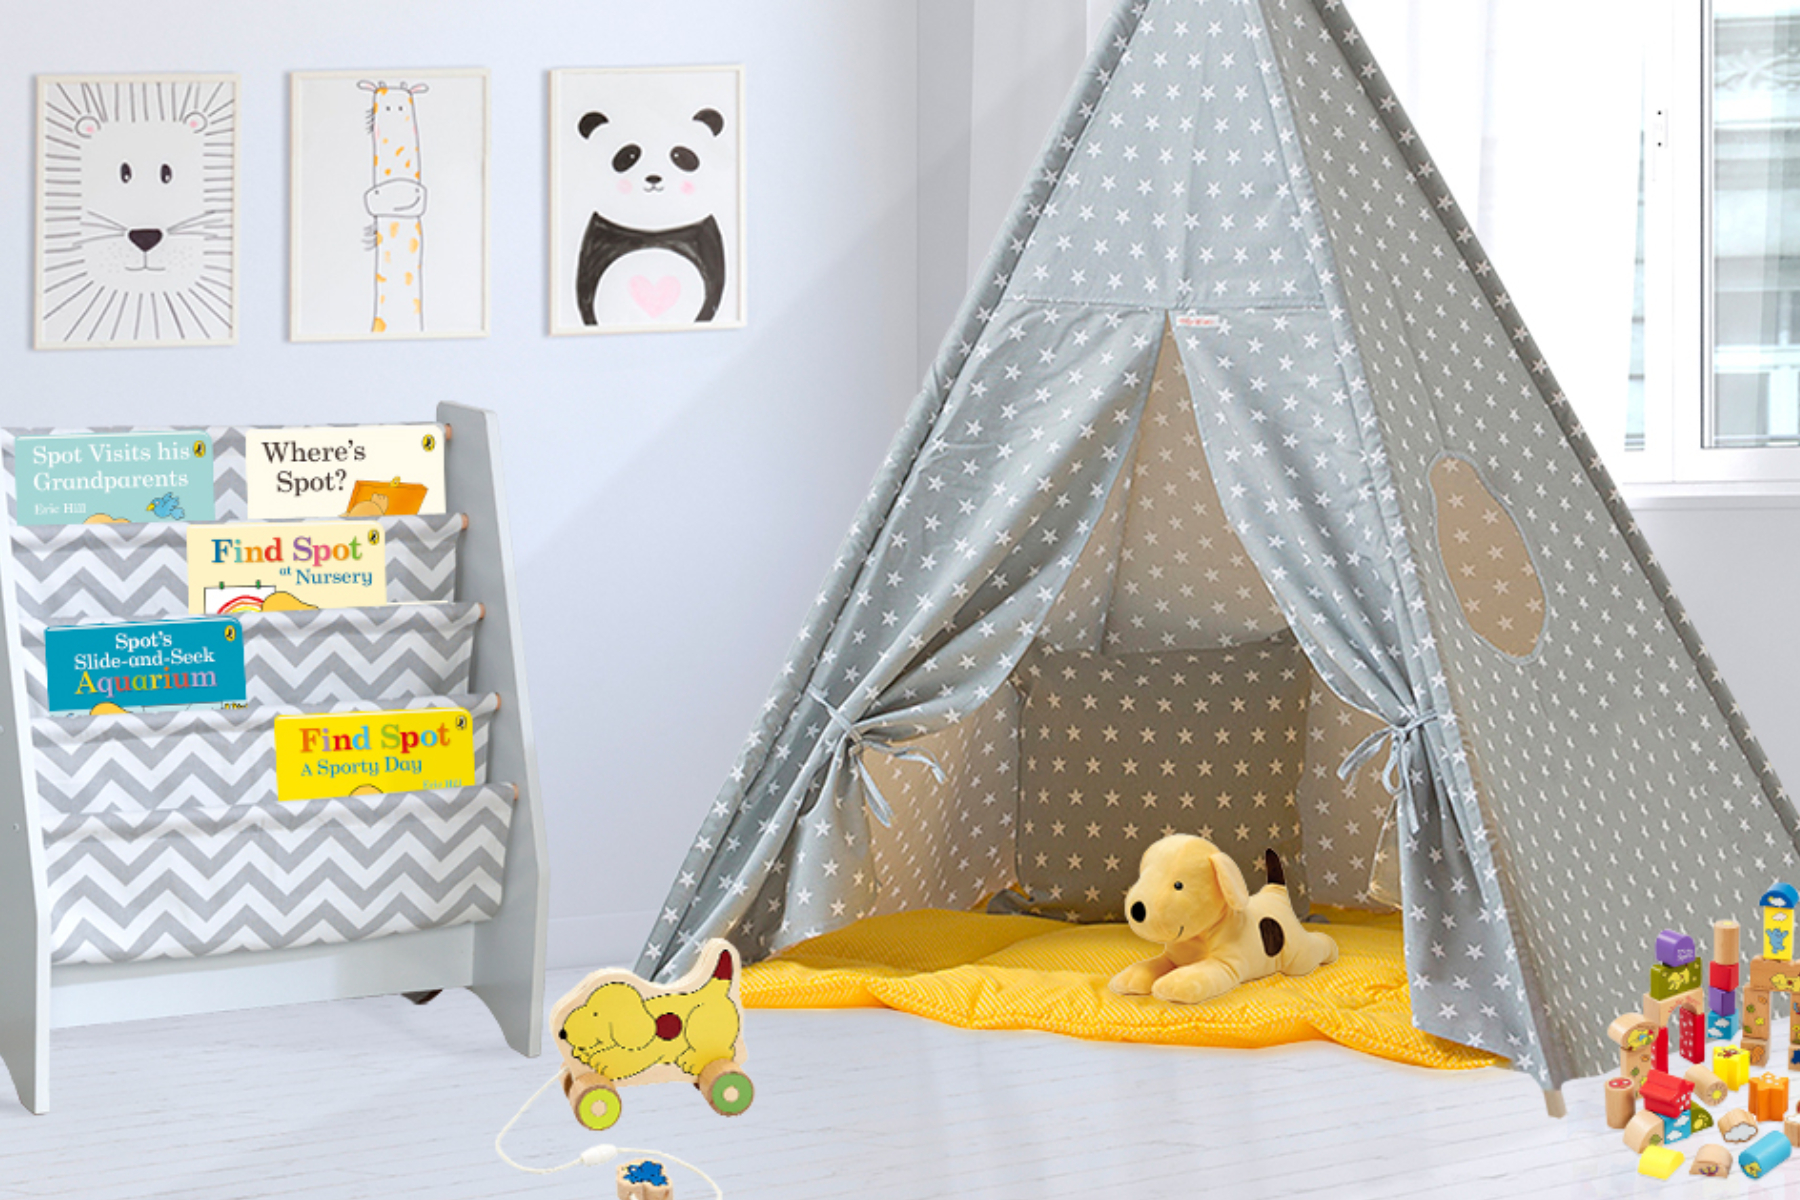 A photo of a star patterned play tent with a Spot the dog plushie inside, surrounded by other toys, as well as a bookshelf with a selection of Spot the dog books